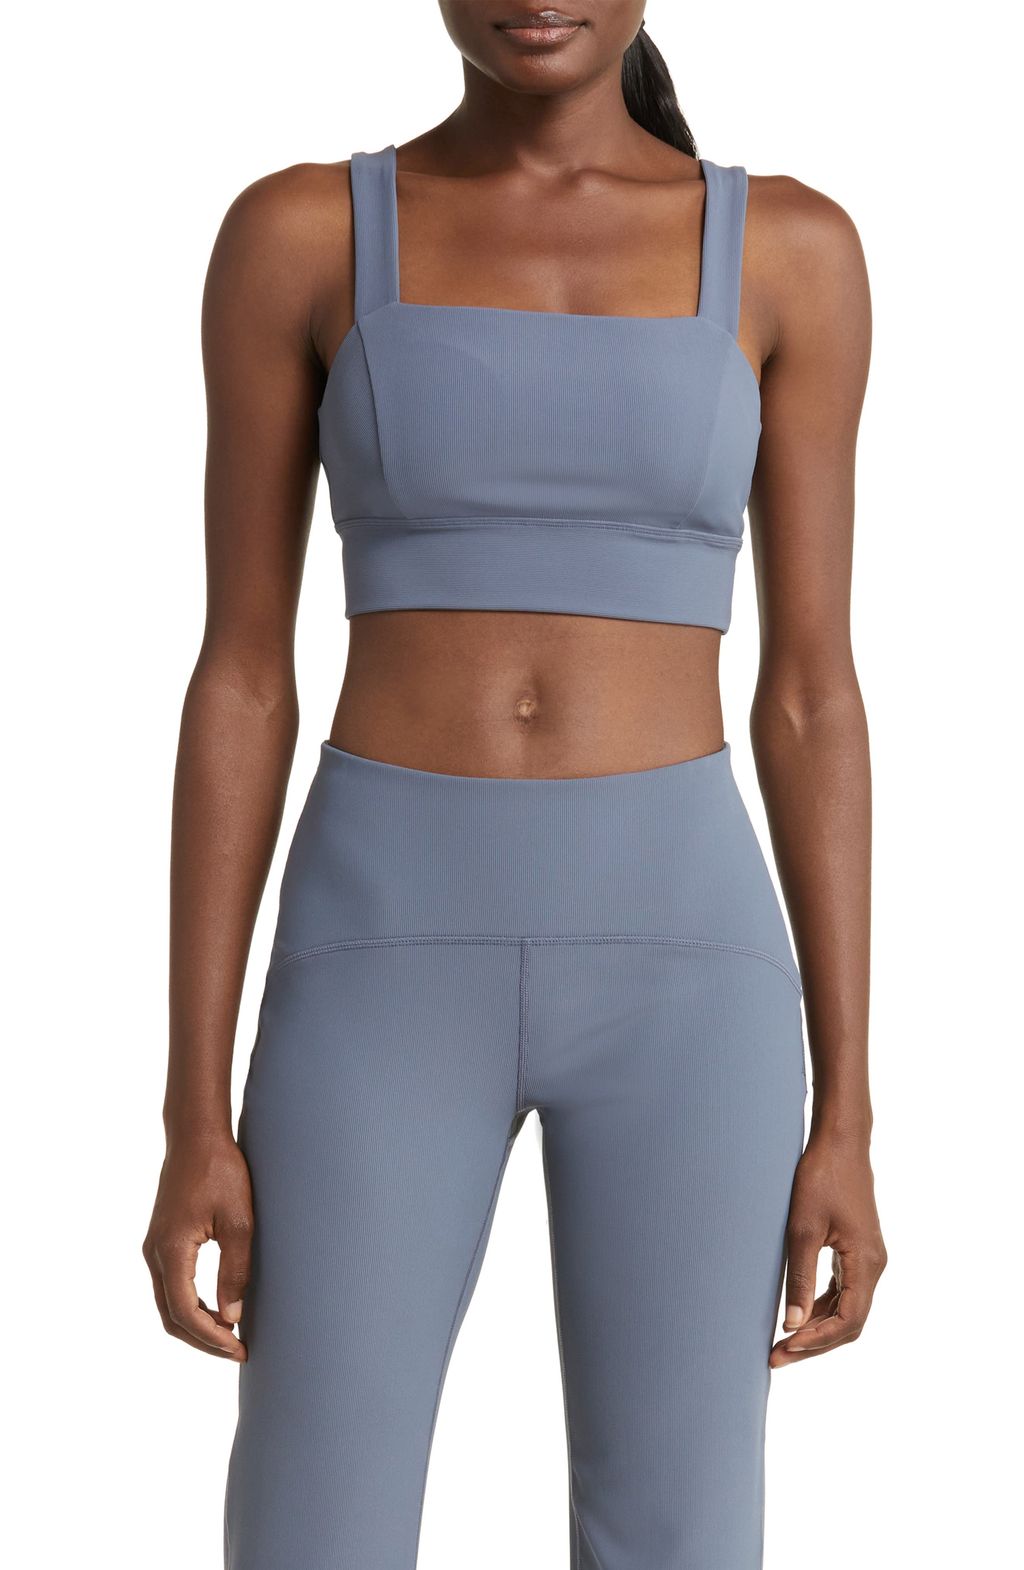 The 25 Best Supportive Sports Bras For Large Busts Who What Wear 